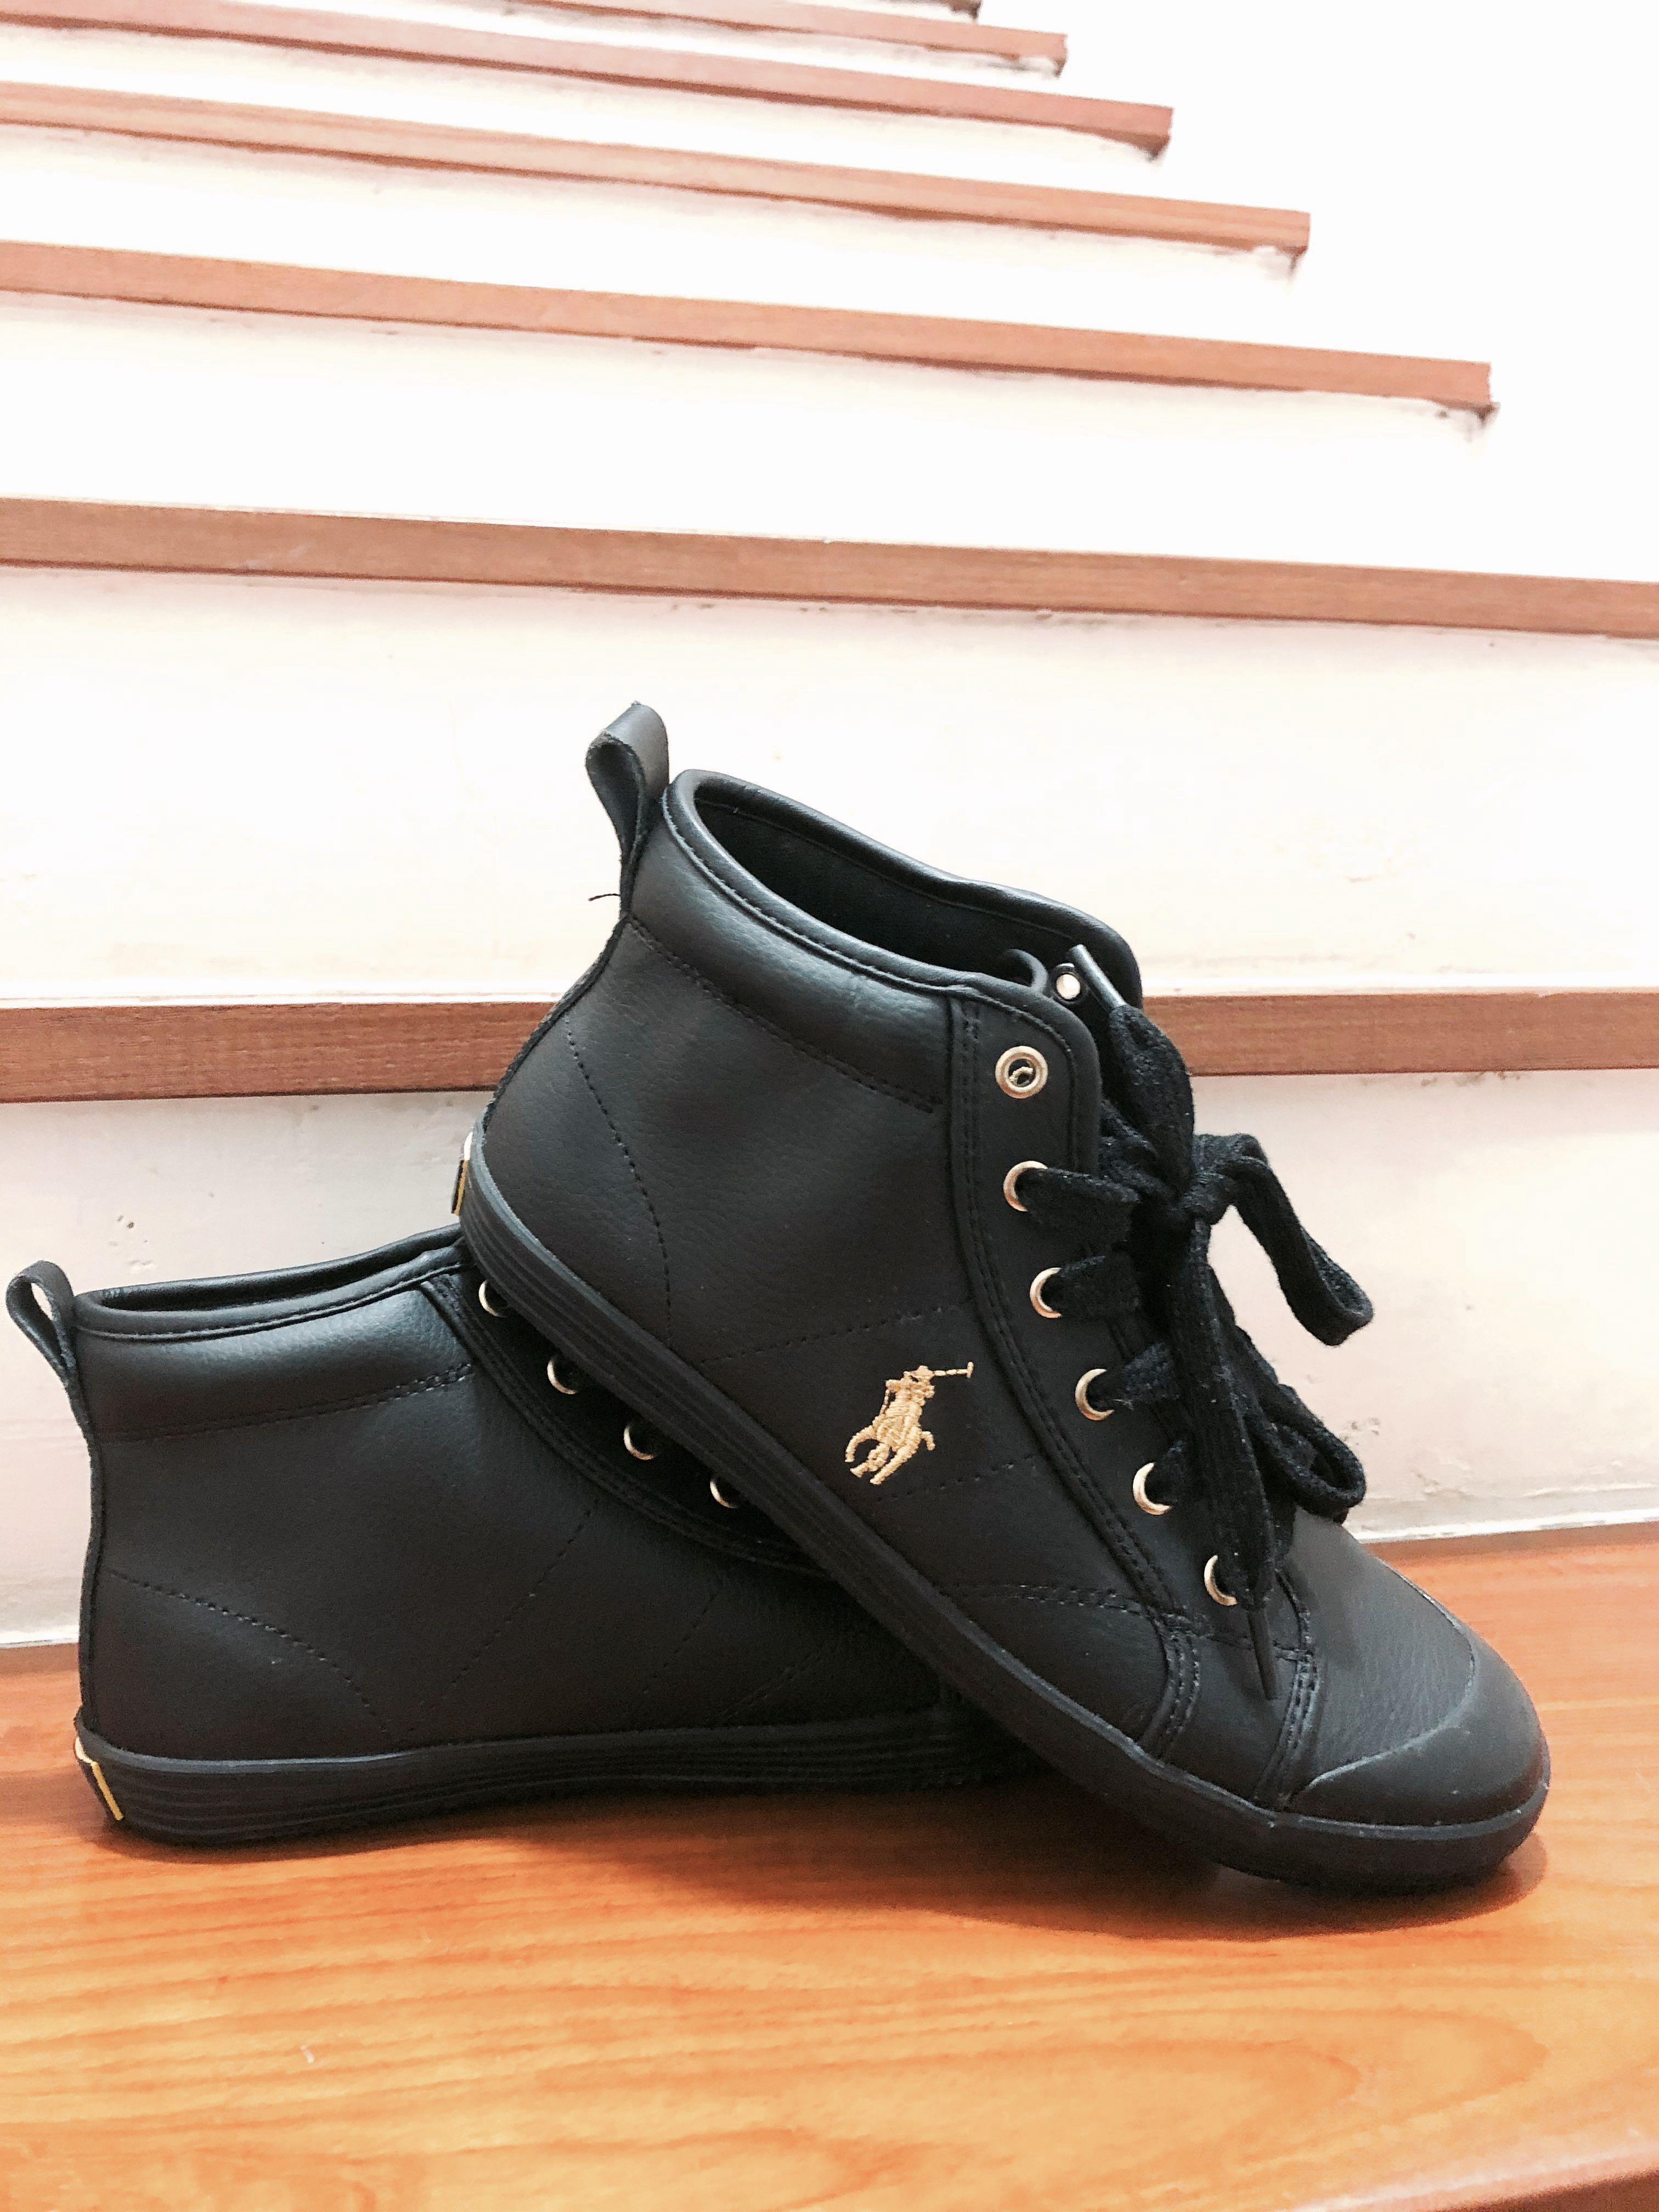 polo high top leather shoes